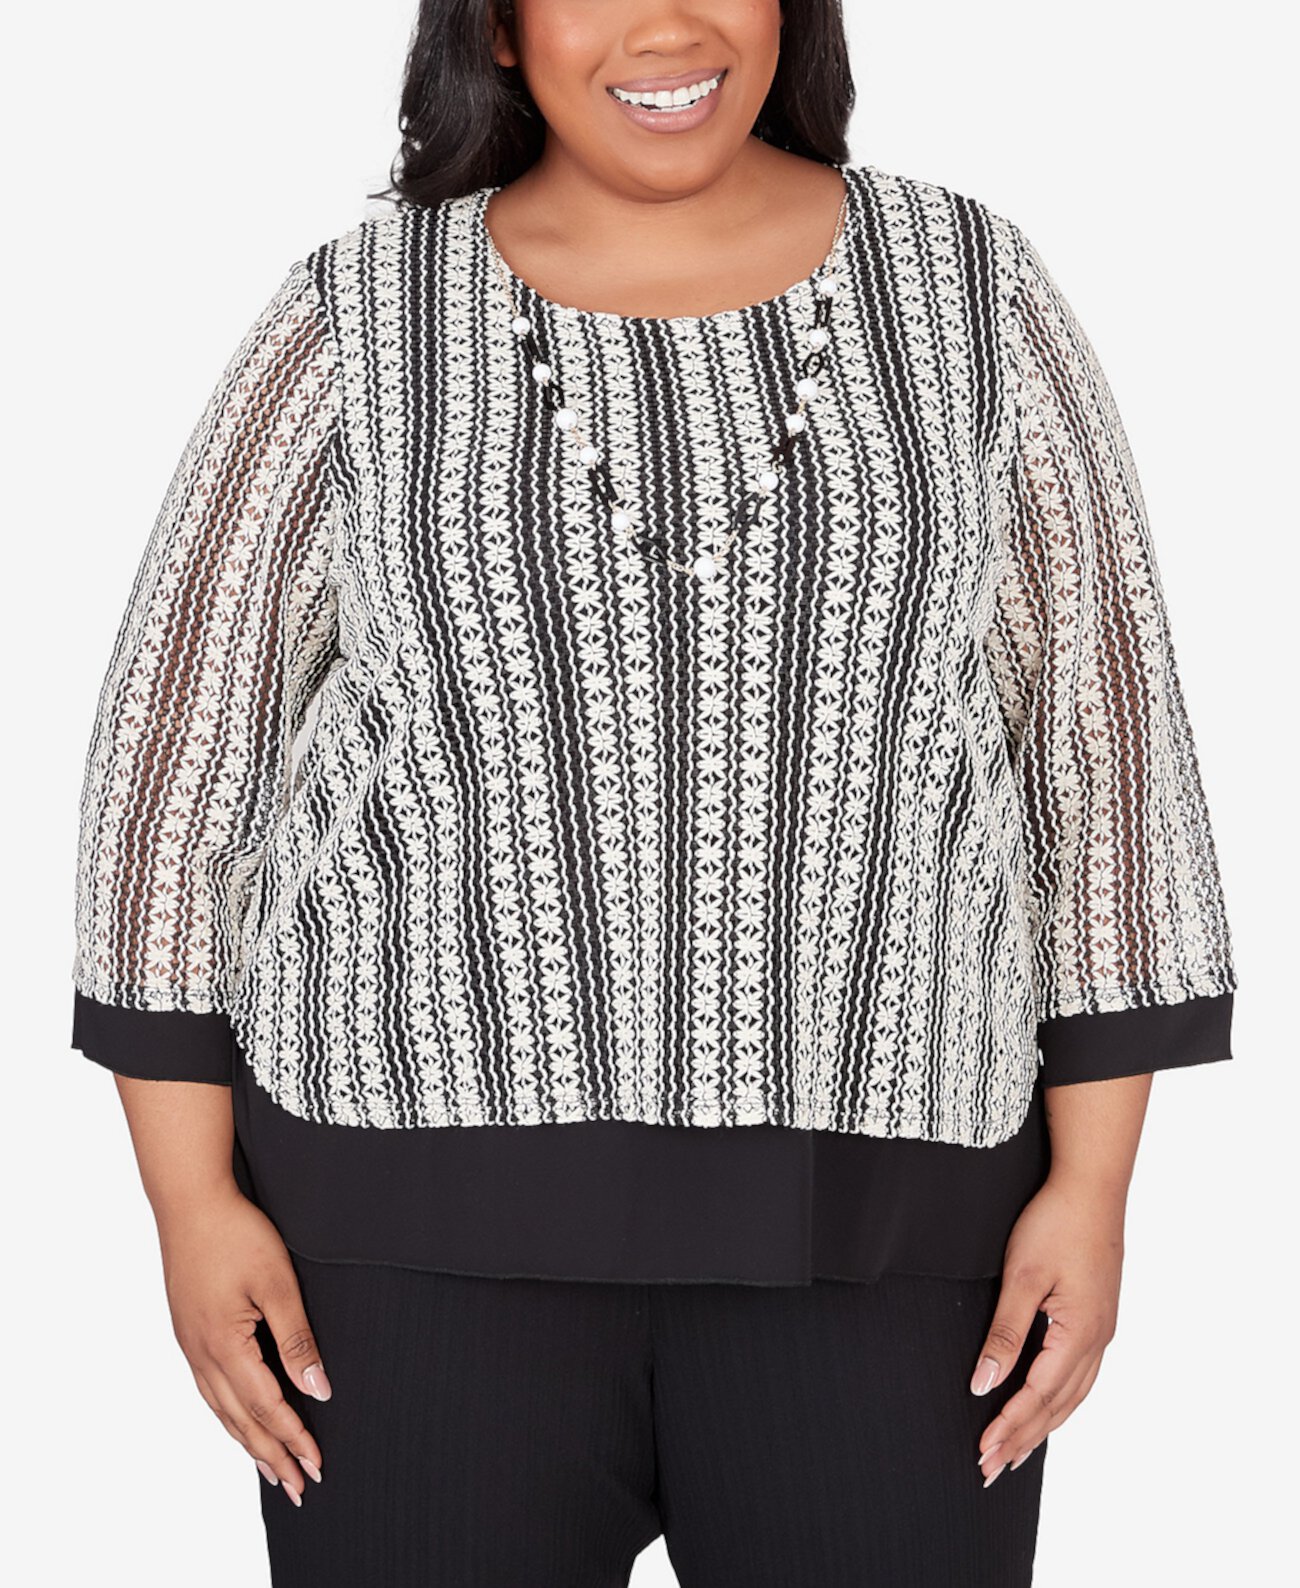 Plus Size Opposites Attract Striped Texture Top with Necklace Alfred Dunner